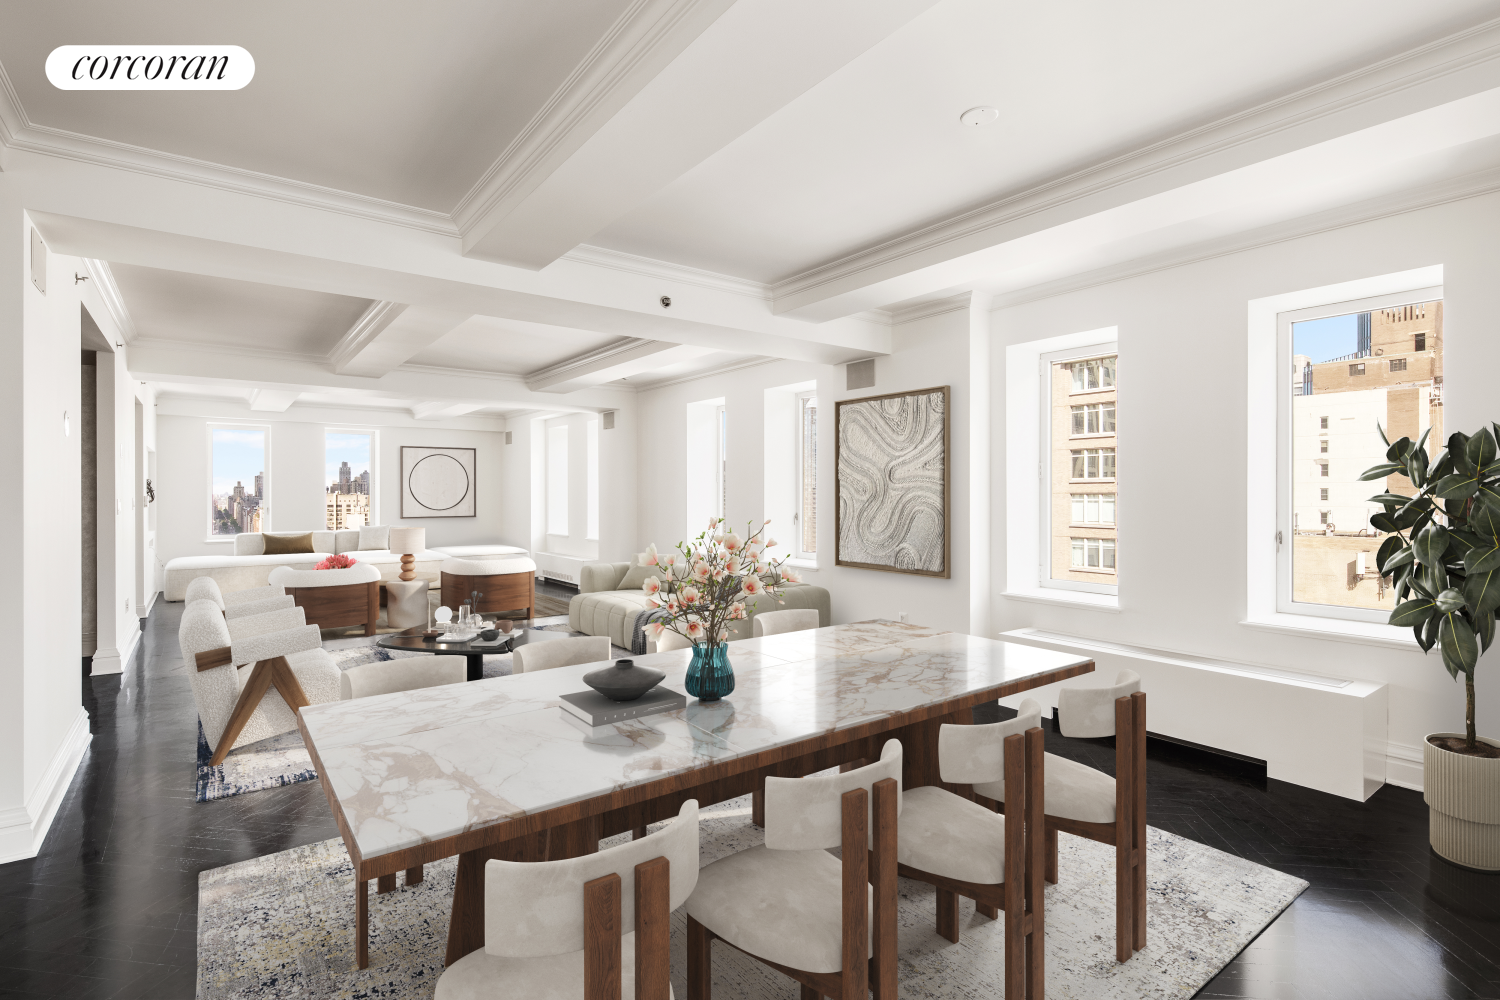 502 Park Avenue Ph28, Lenox Hill, Upper East Side, NYC - 4 Bedrooms  
5.5 Bathrooms  
10 Rooms - 